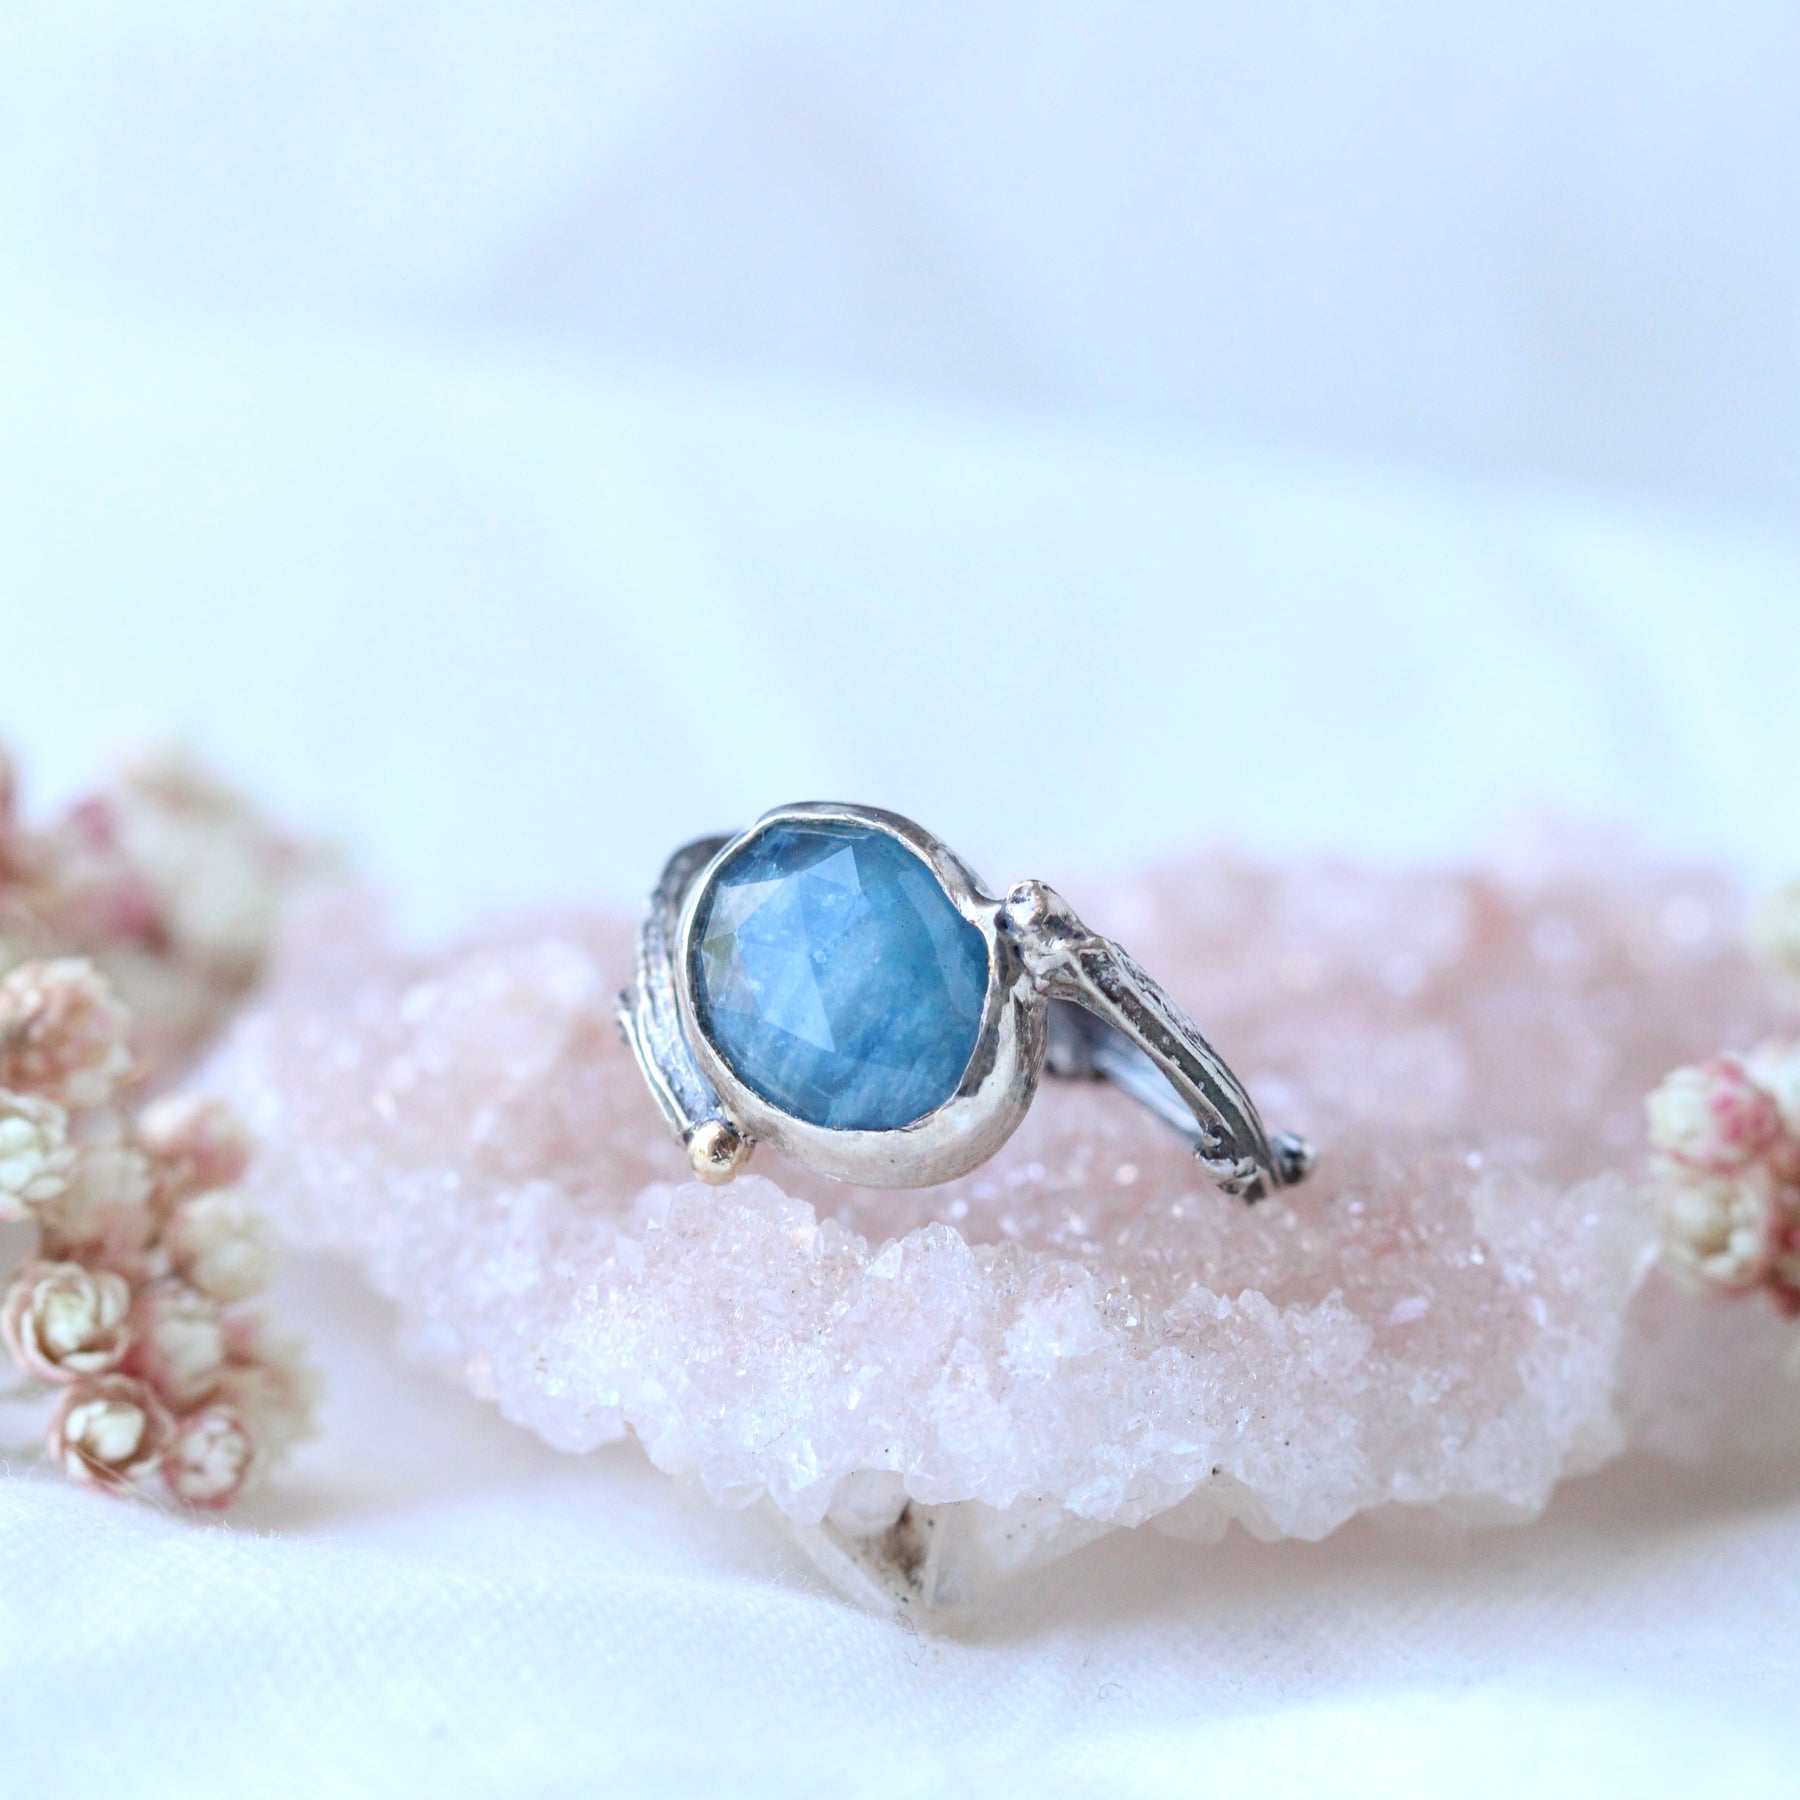 Clearance Sale    Aquamarine and sterling silver branch ring with 14k gold accent